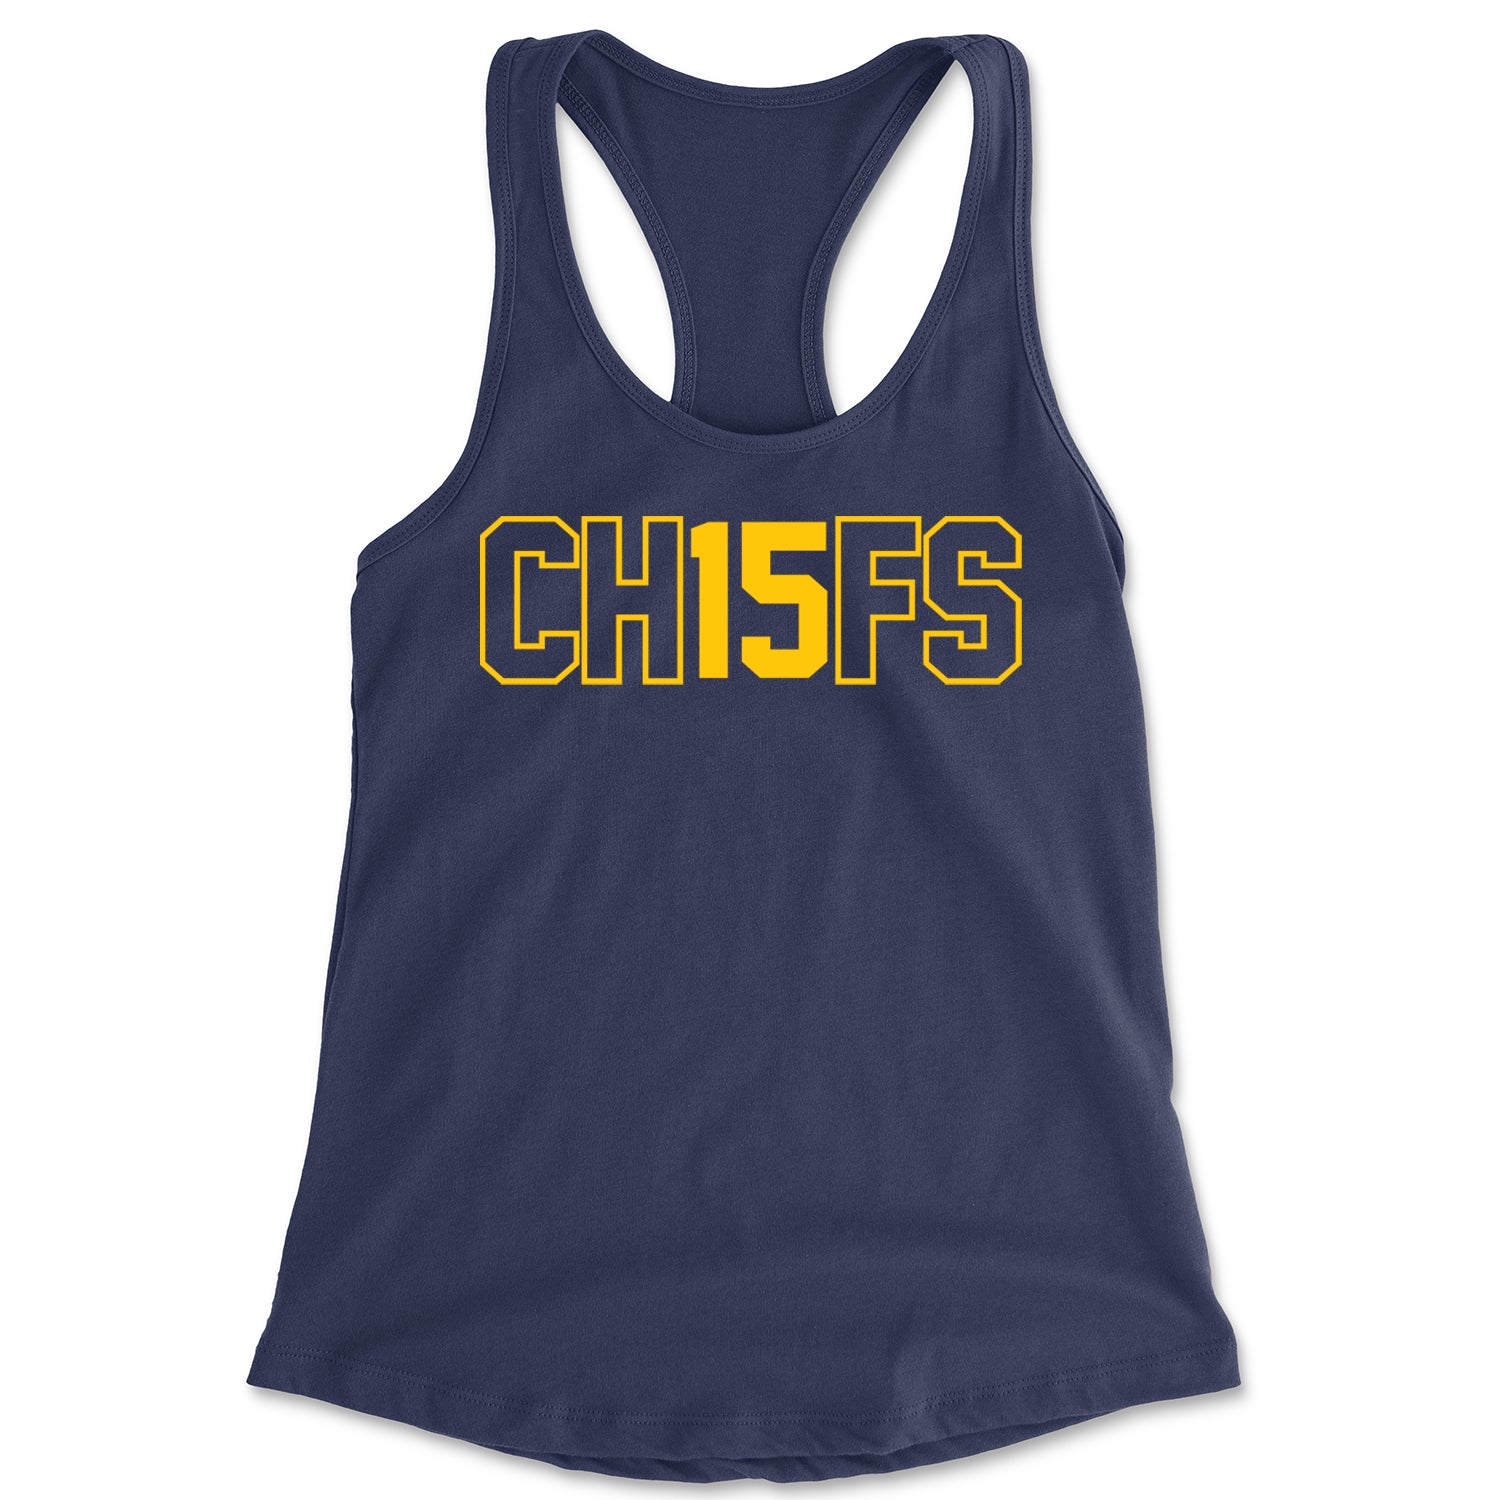 Ch15fs Chief 15 Shirt Racerback Tank Top for Women ass, big, burrowhead, game, kelce, know, moutha, my, nd, patrick, role, shut, sports, your by Expression Tees